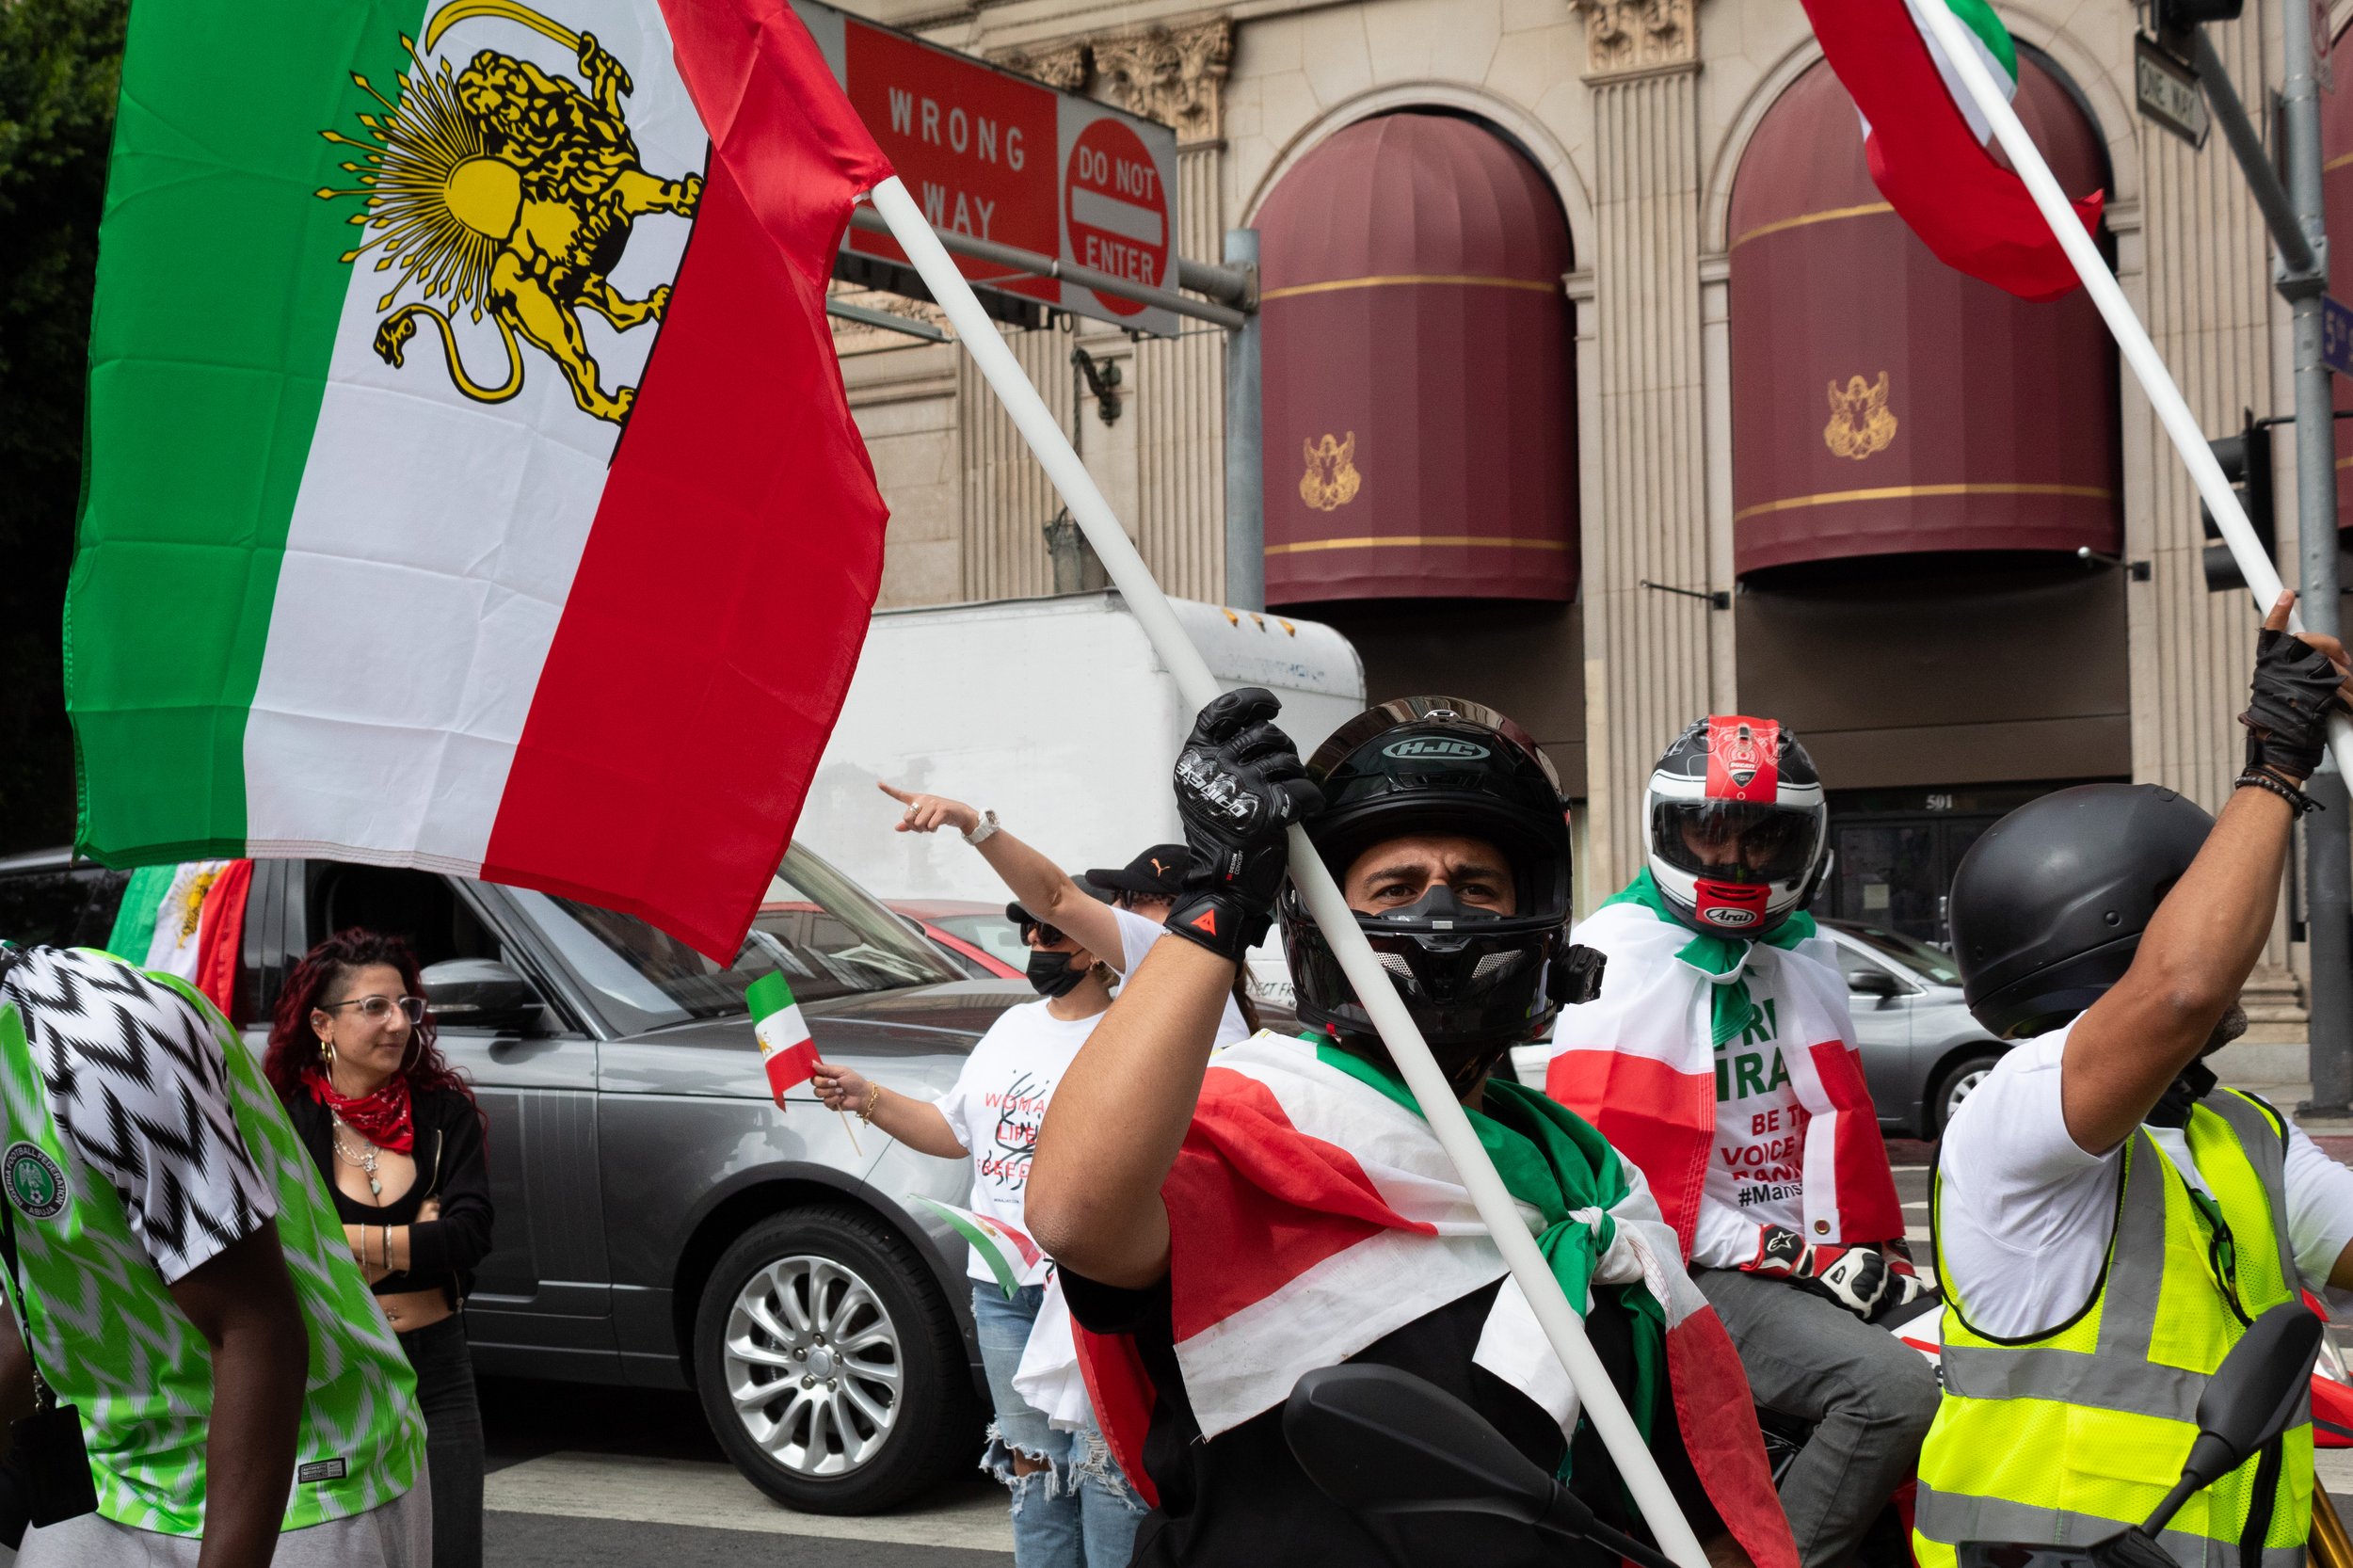  Parsha Abadi holding up the Iranian flag while sitting on his motorcycle waiting for the Freedom For Iran rally to begin its march from Pershing Square to Los Angeles City Hall. The rally marched from Pershing Square to Los Angeles City Hall with at